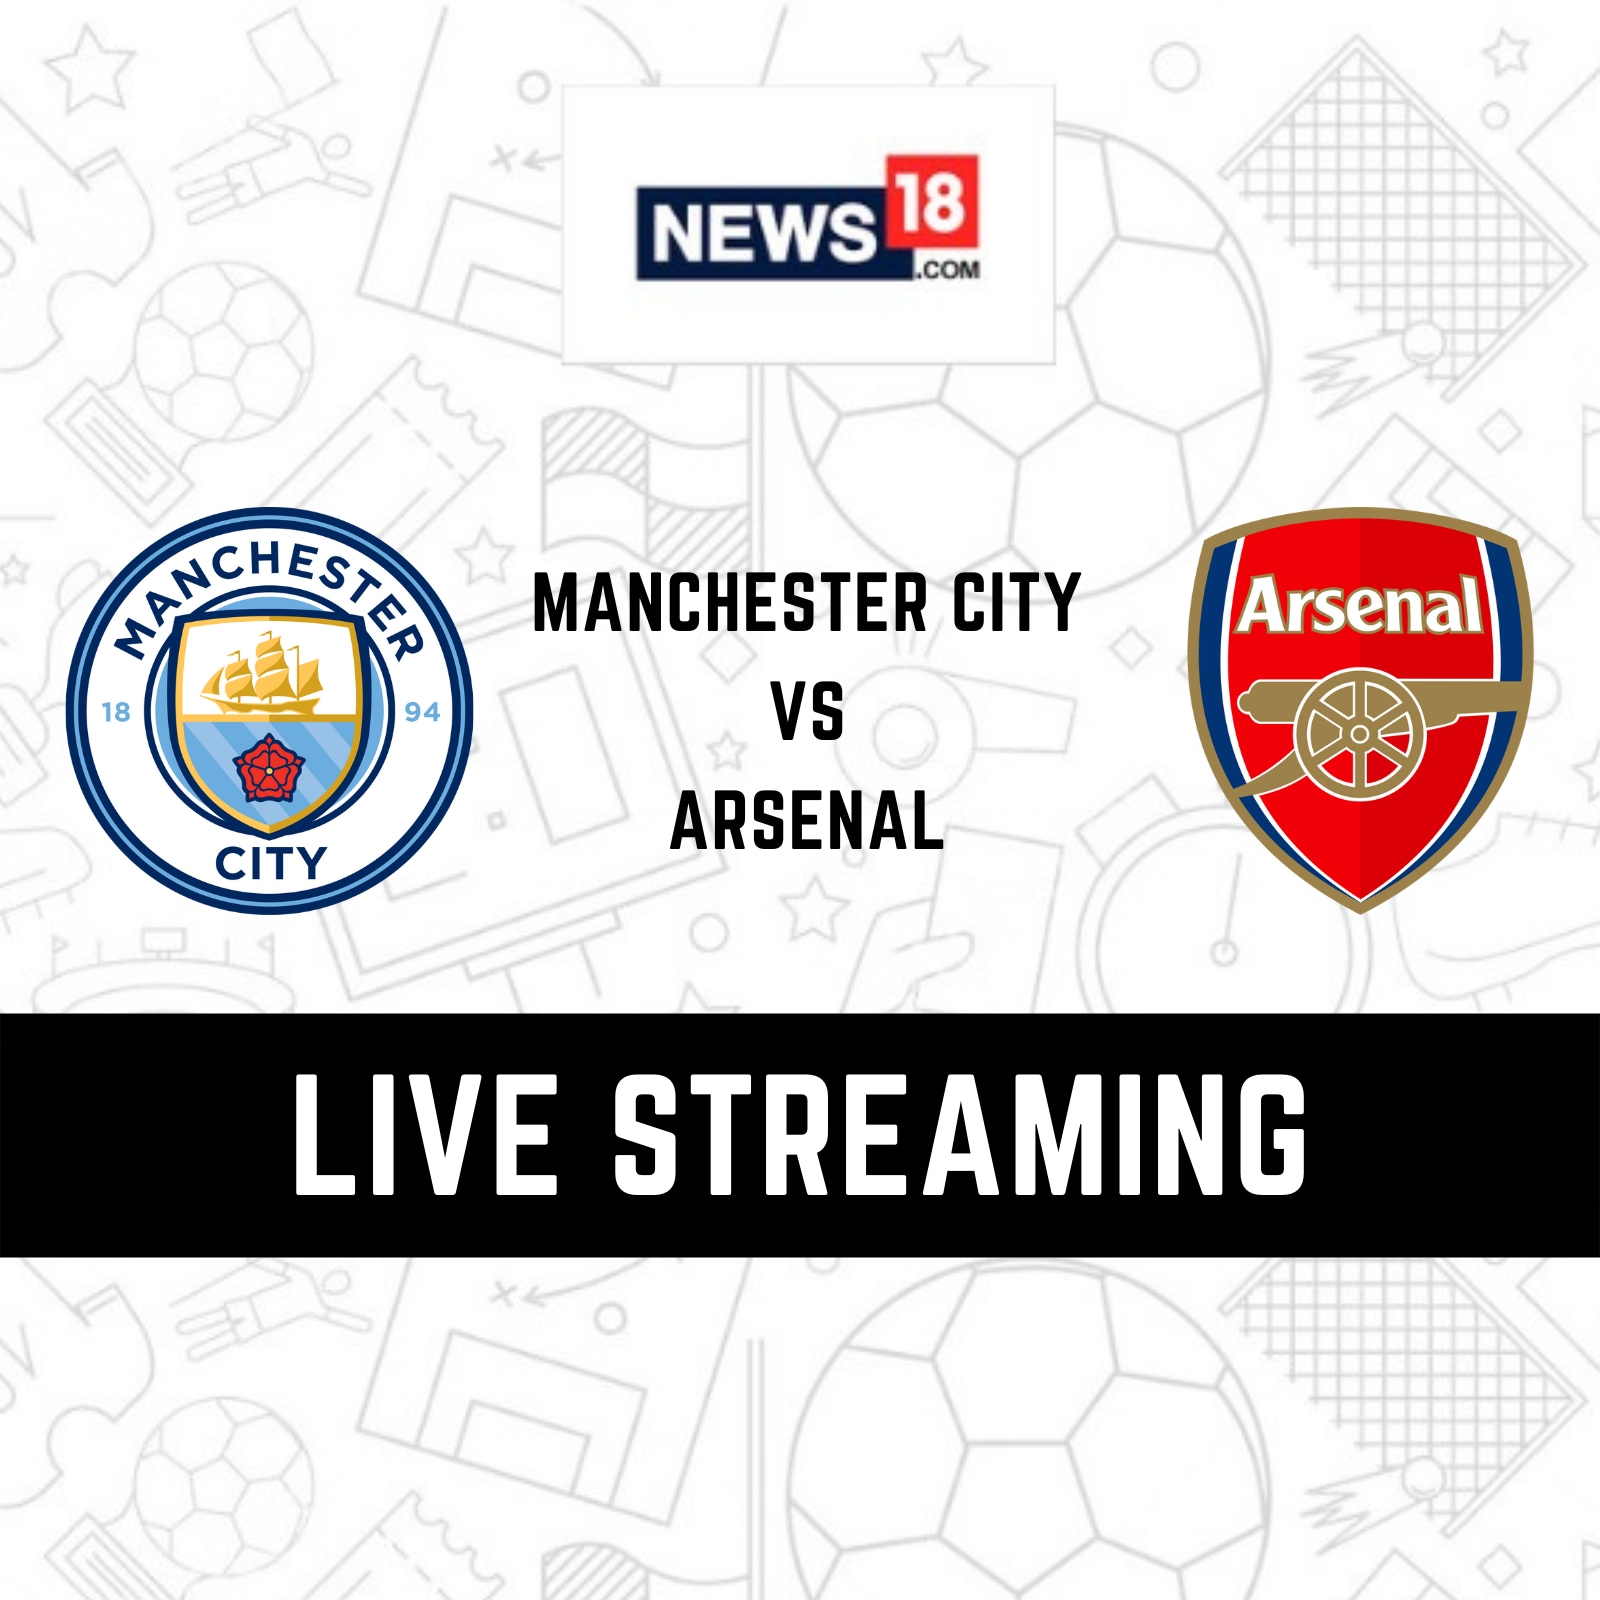 Watch a Manchester City vs Arsenal live stream from anywhere